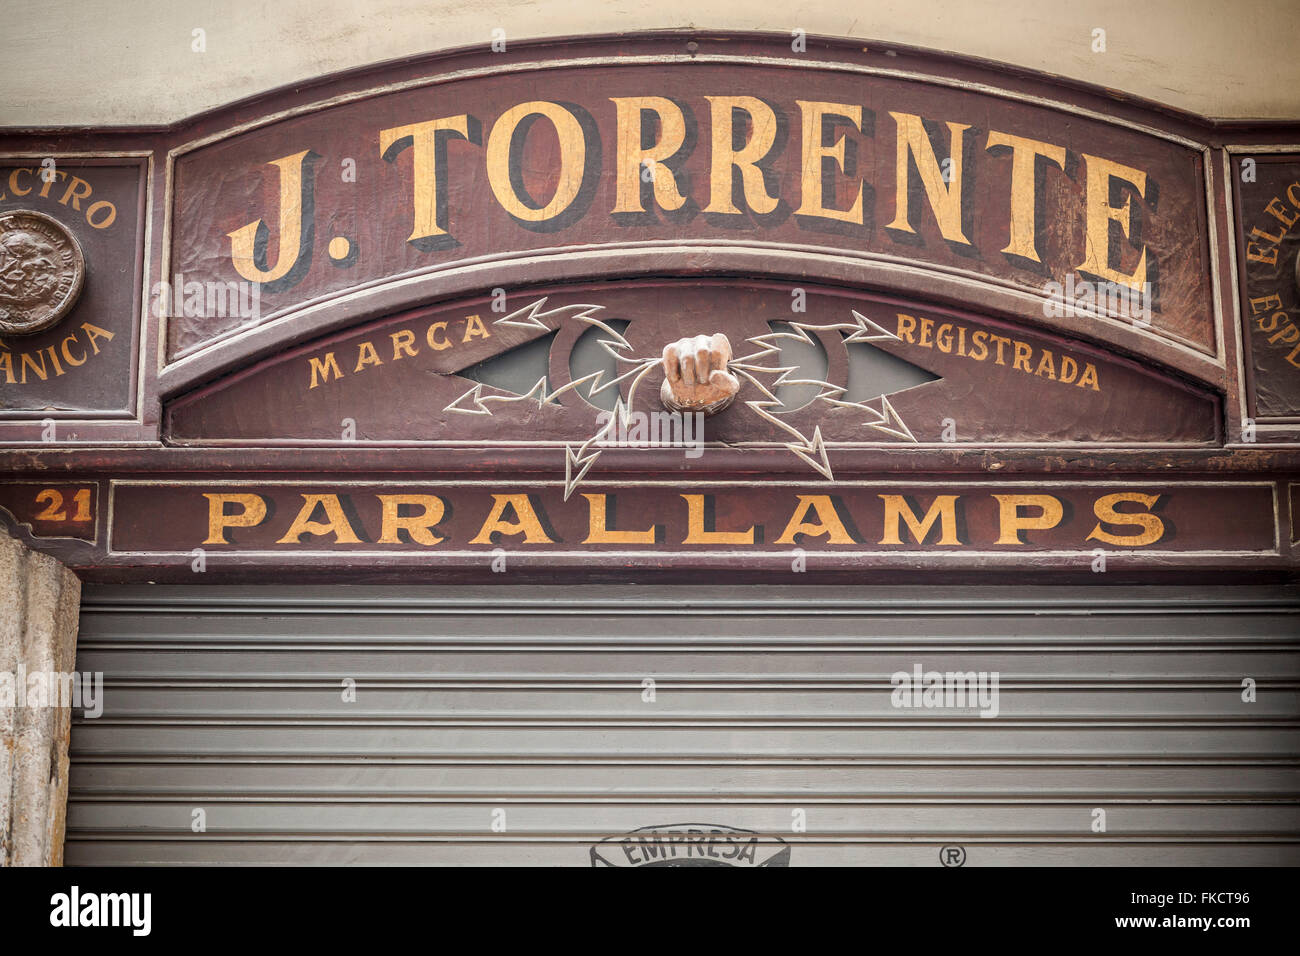 Shop J. Torrente Parallamps (Parallamps-Lighting rod), founded in 1860, El Raval, Barcelona. Stock Photo